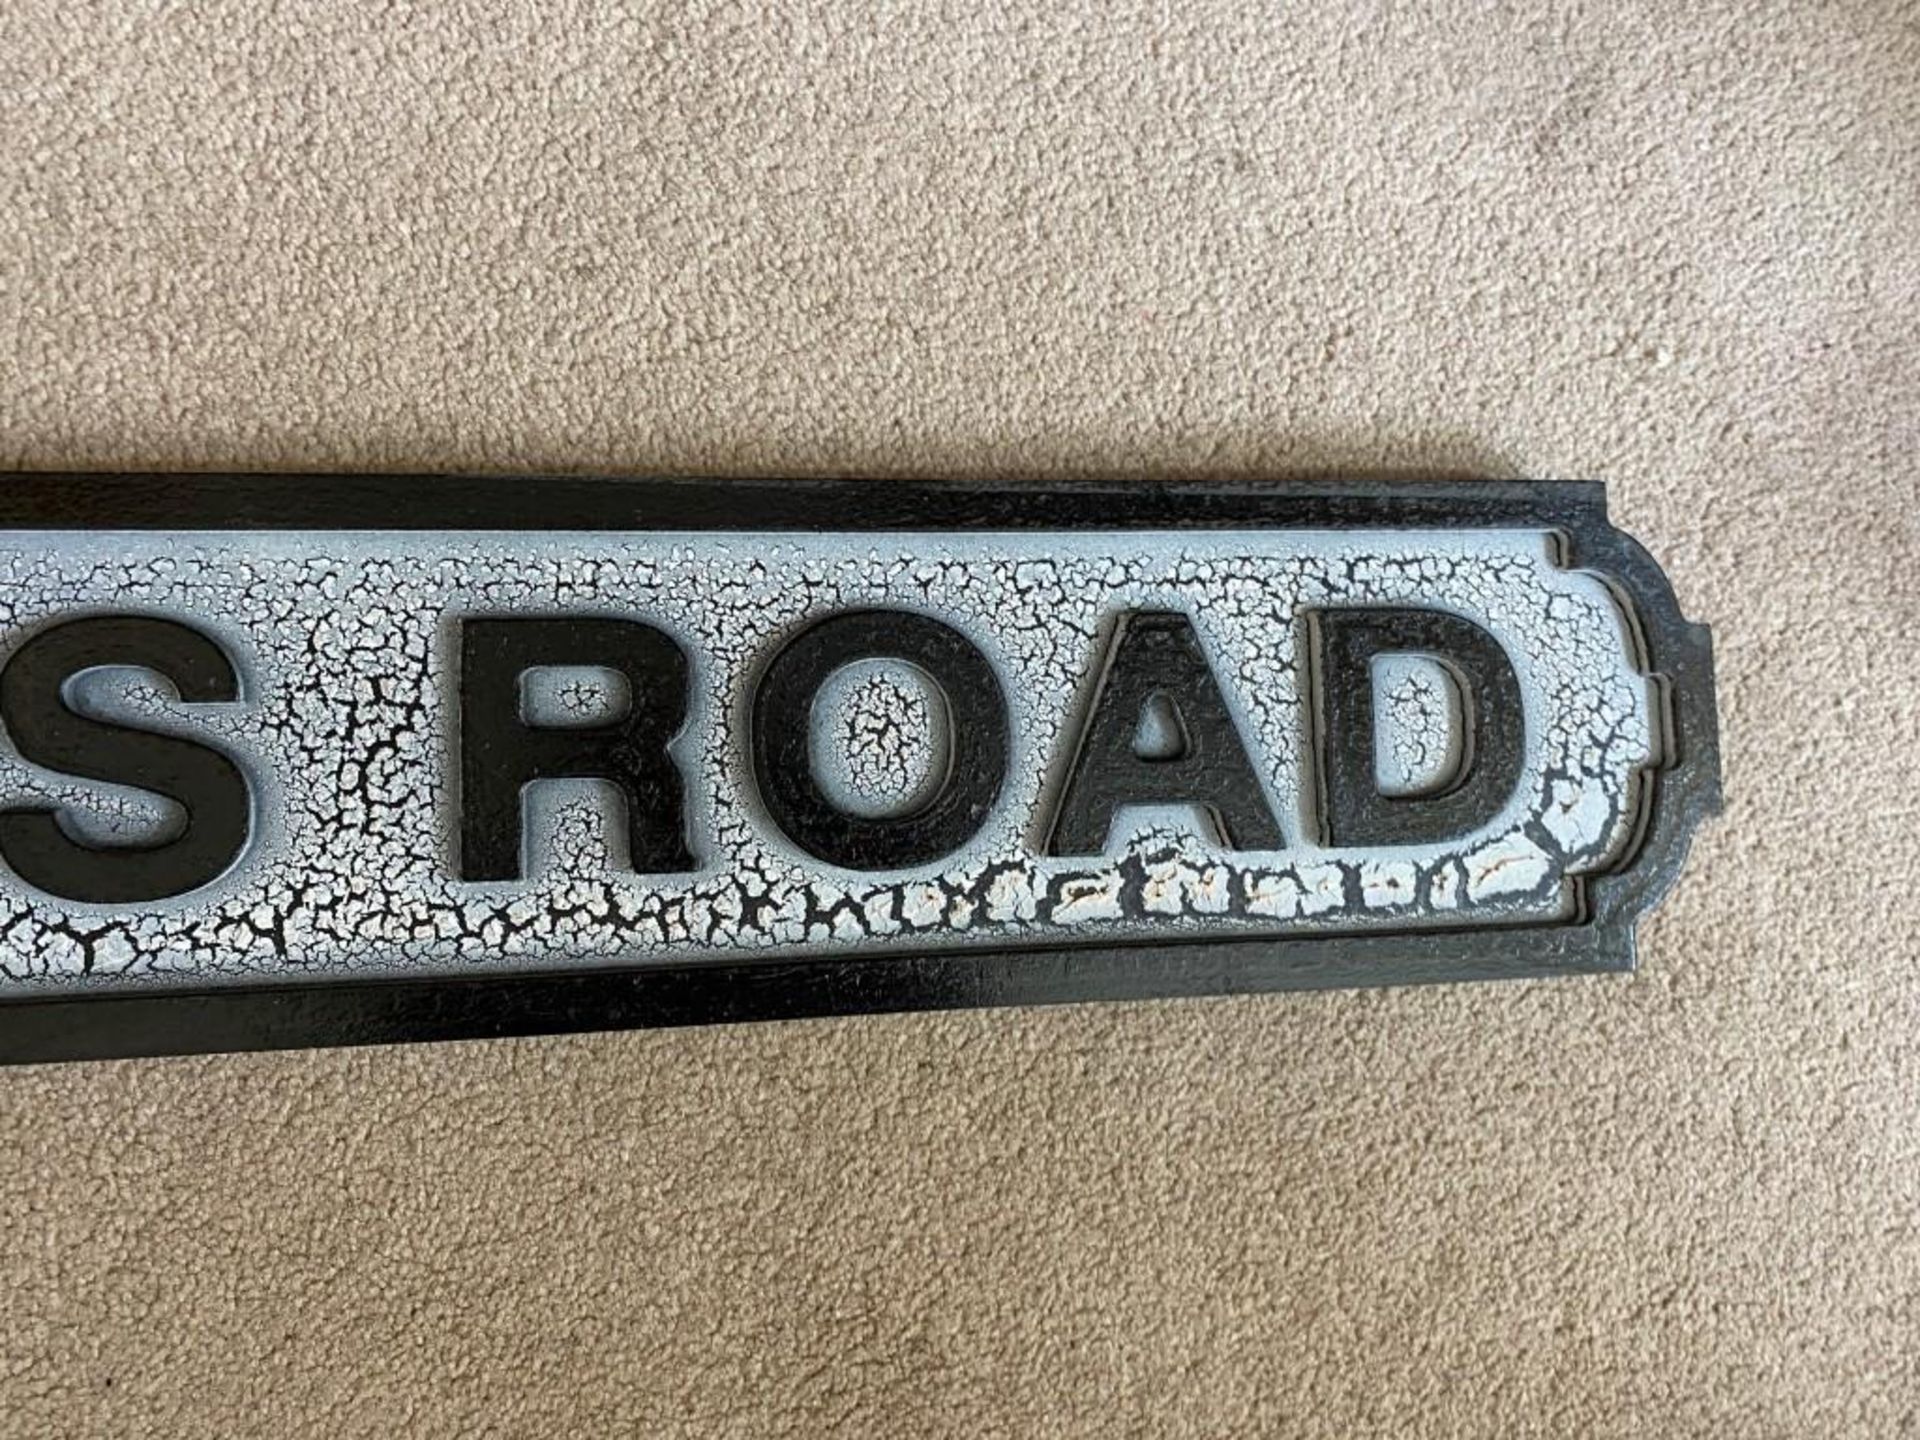 A WOODEN KINGS ROAD STREET SIGN, LENGTH 80 CM - Image 3 of 4